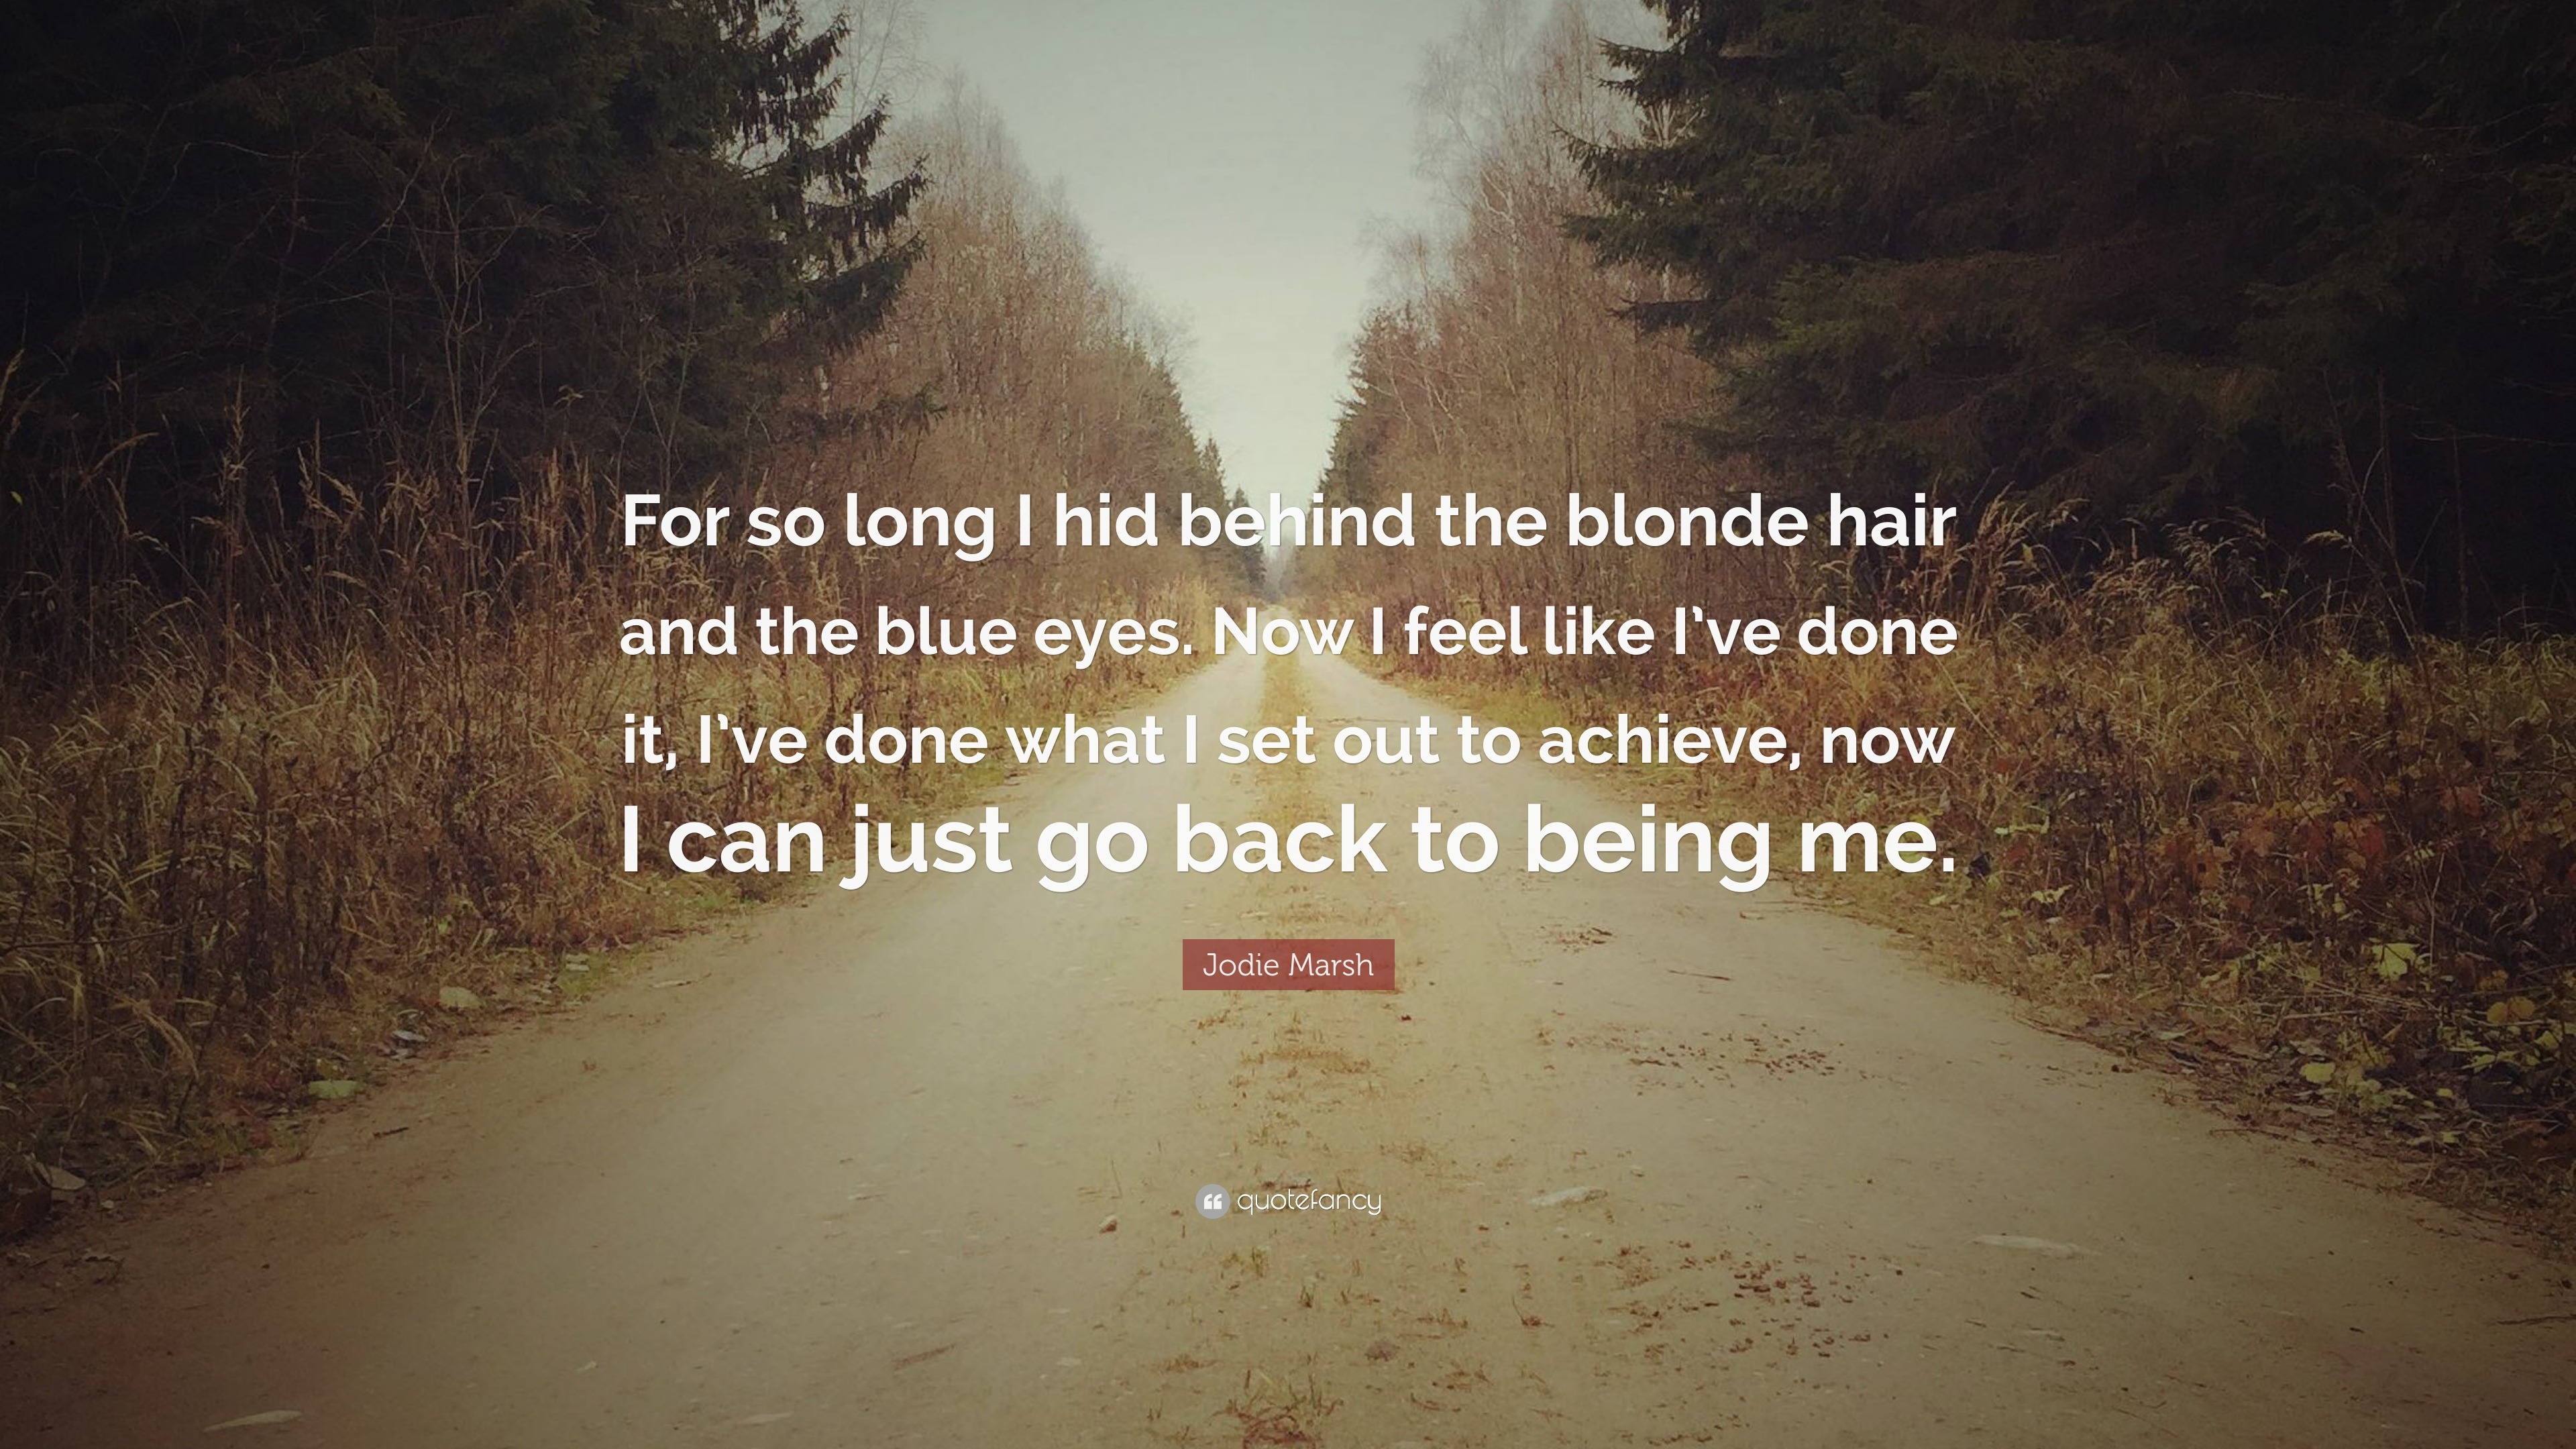 2. "Cute Blonde Hair Quotes for Your Next Selfie" - wide 3